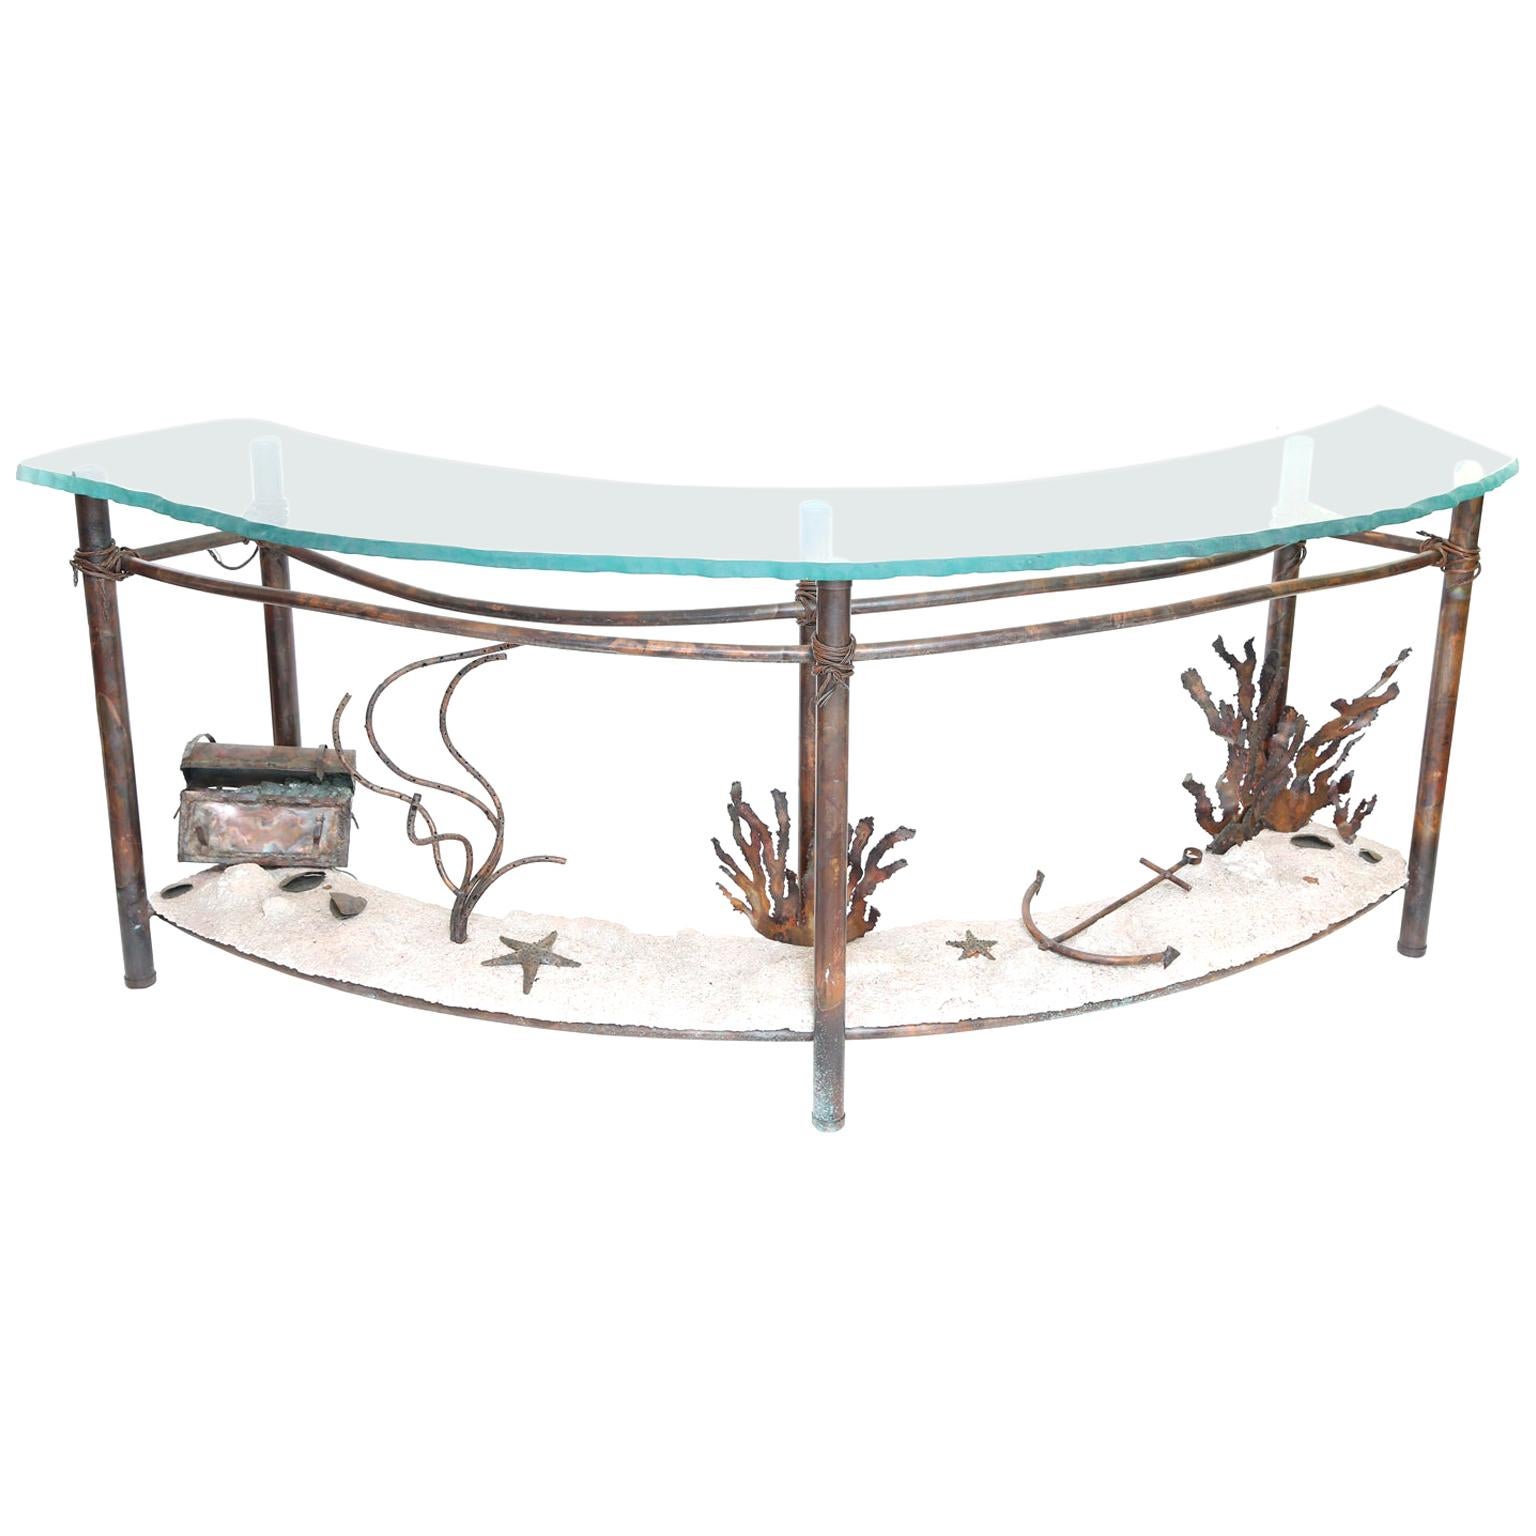 Signed Glen Mayo Sculptural Undersea Console Table of Copper